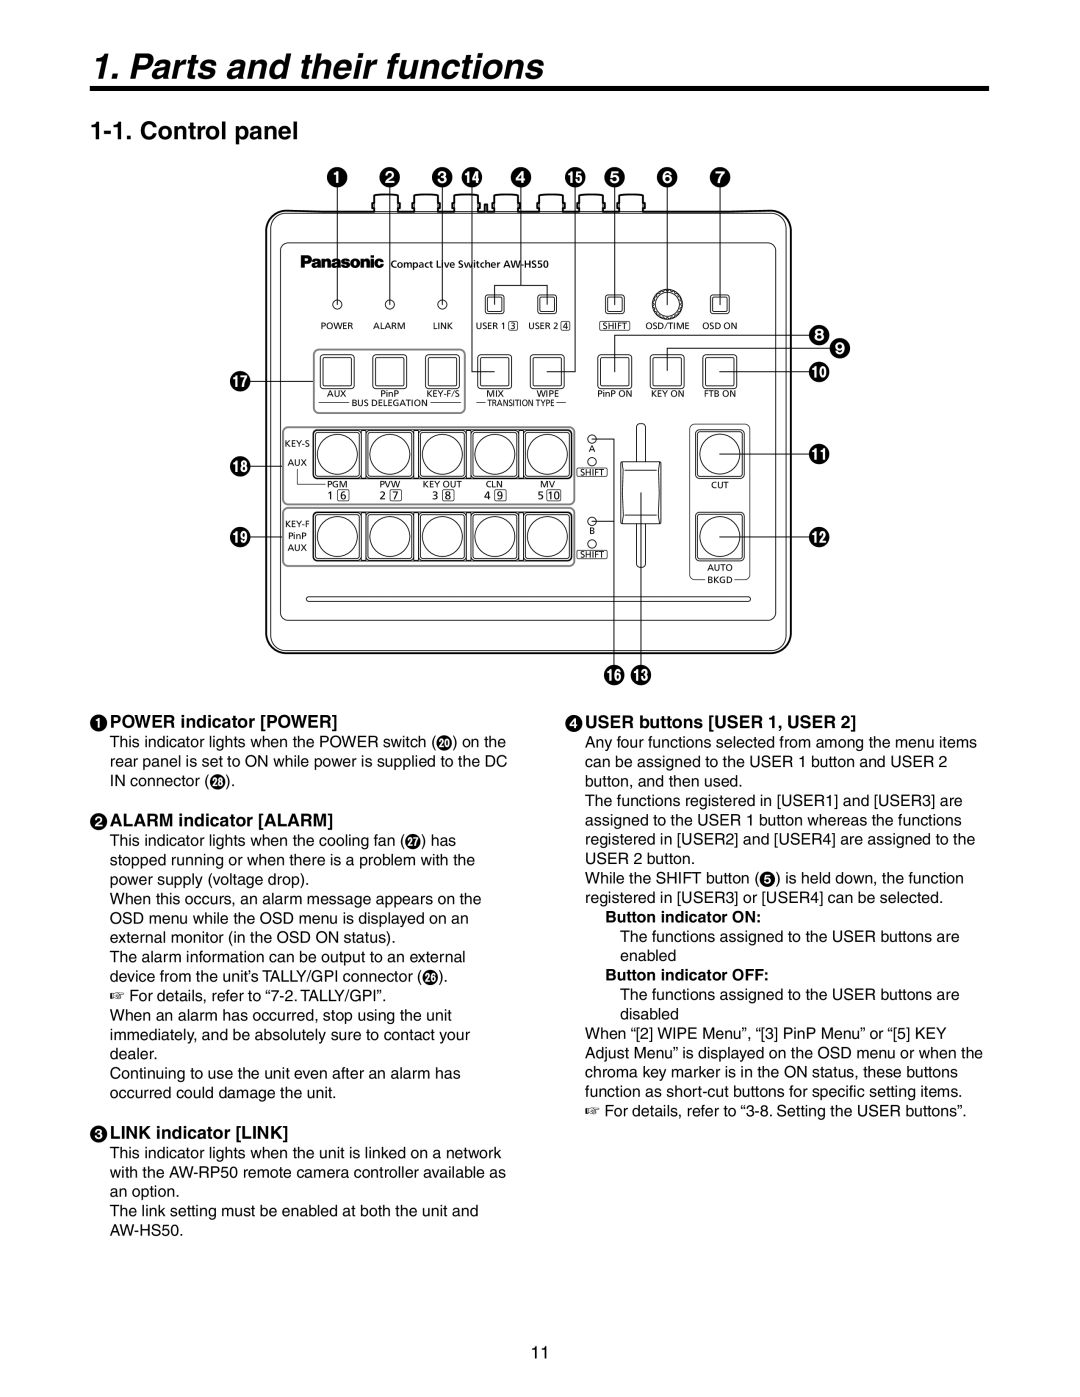 Panasonic AW-HS50N Parts and their functions, Control panel, POWER indicator POWER, ALARM indicator ALARM 